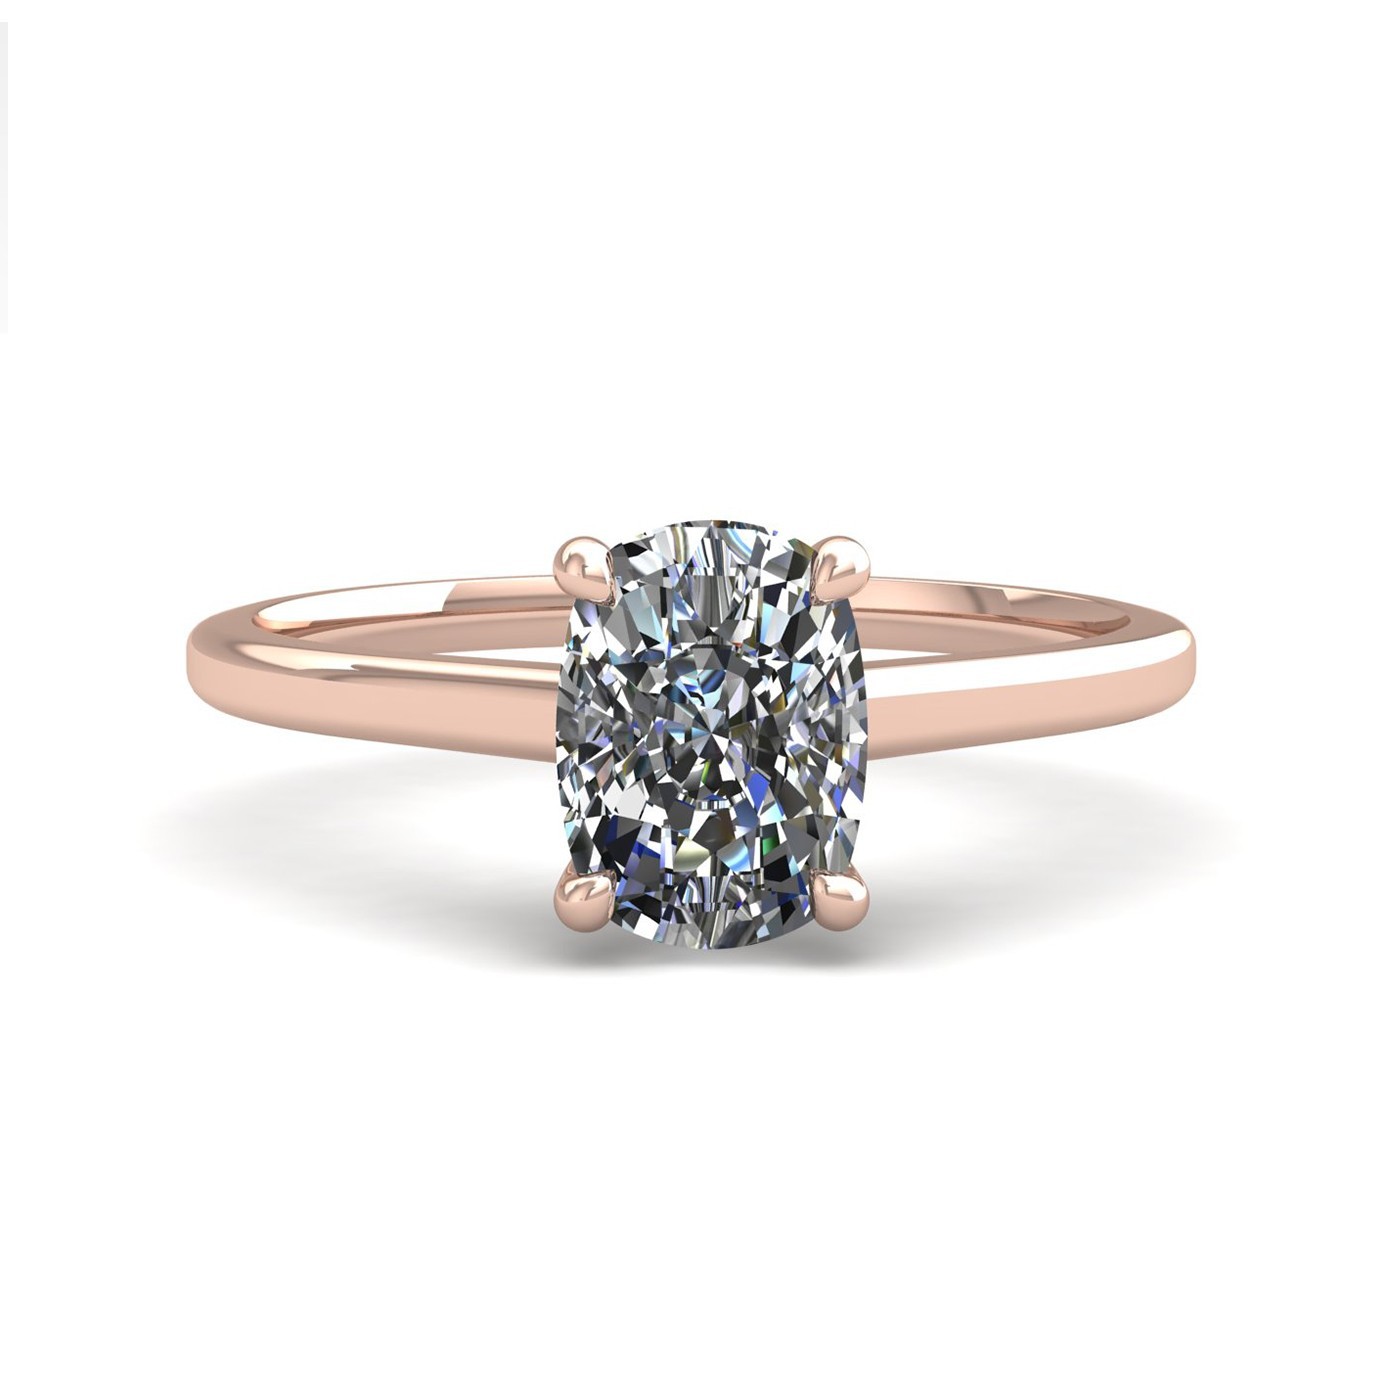 18k rose gold 1,00 ct 4 prongs solitaire elongated cushion cut diamond engagement ring with whisper thin band Photos & images